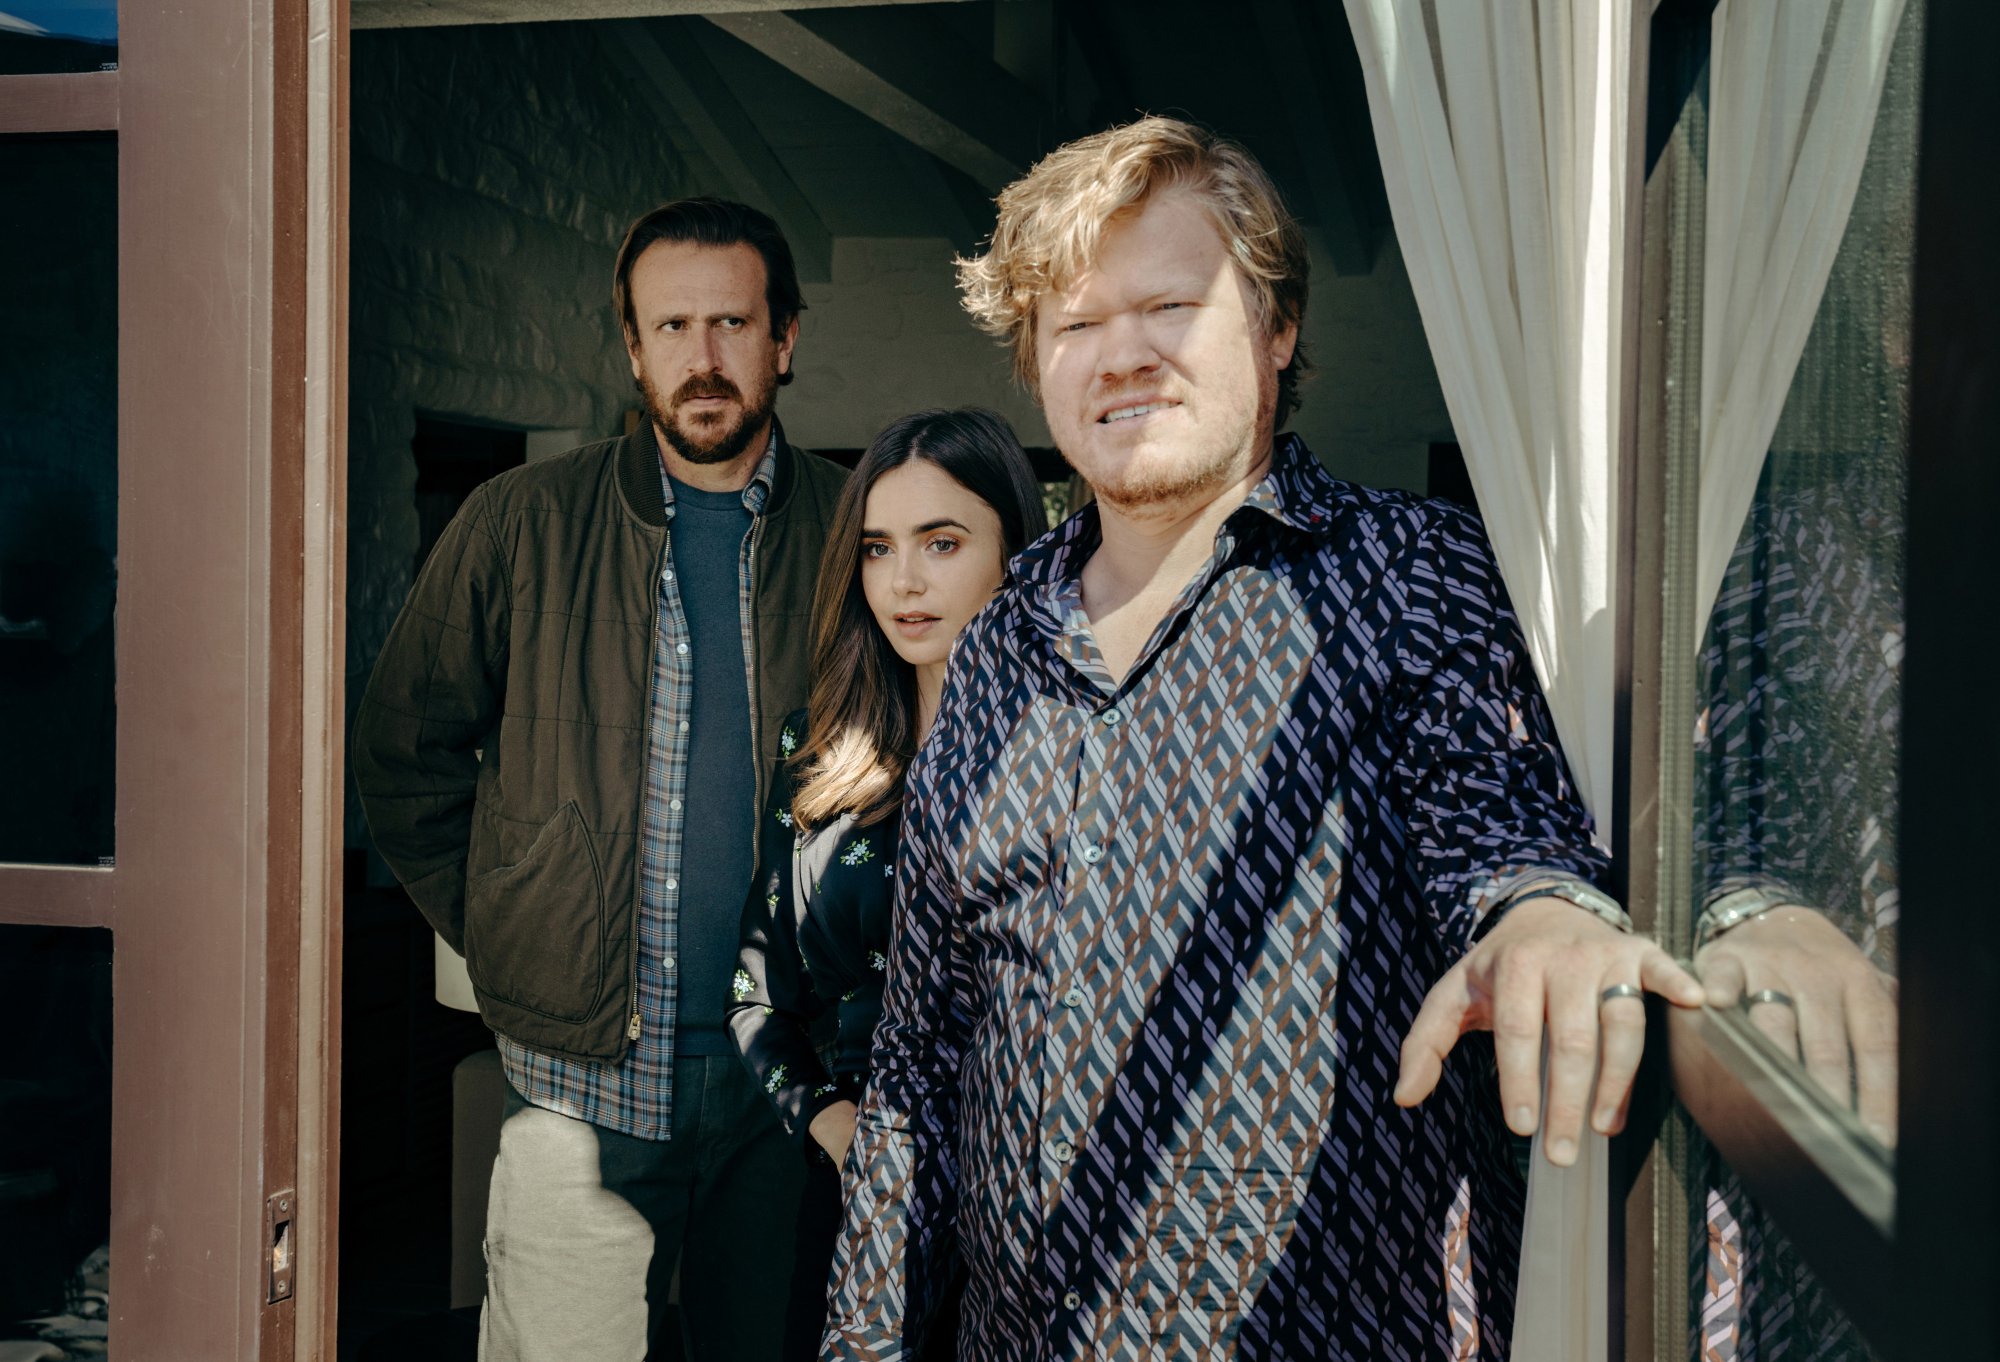 'Windfall' Jason Segel as Nobody, Lily Colins as Wife, and Jesse Plemons as CEO standing in the doorway looking worried